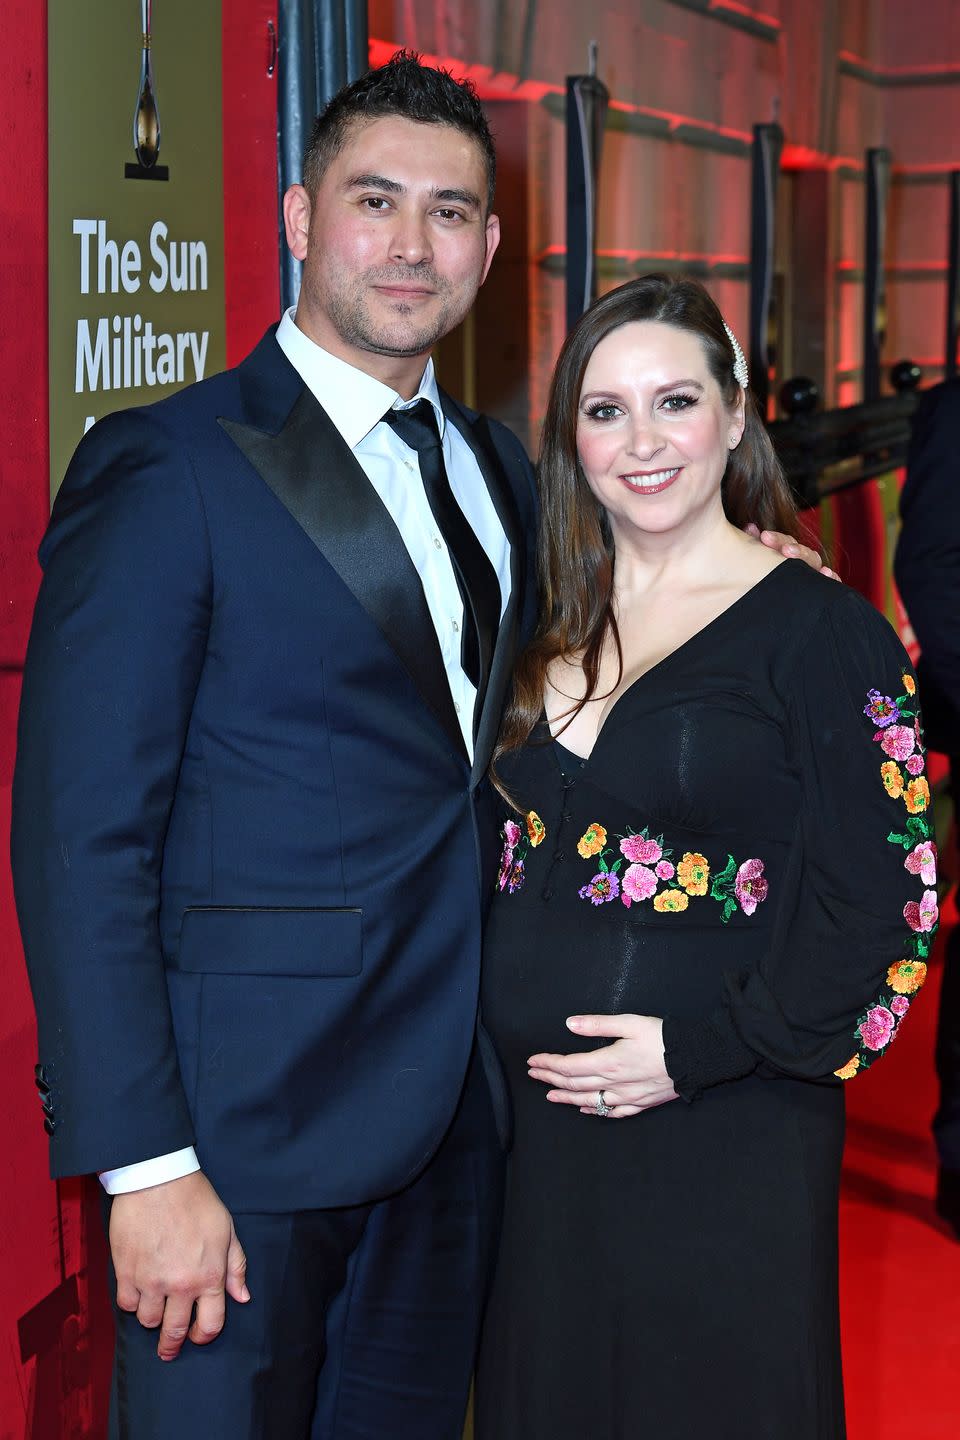 rav wilding and jill morgan, a man and woman stand next to each other smiling at the camera, he wears a navy suit and she wears a black dress as she cradles a baby bump